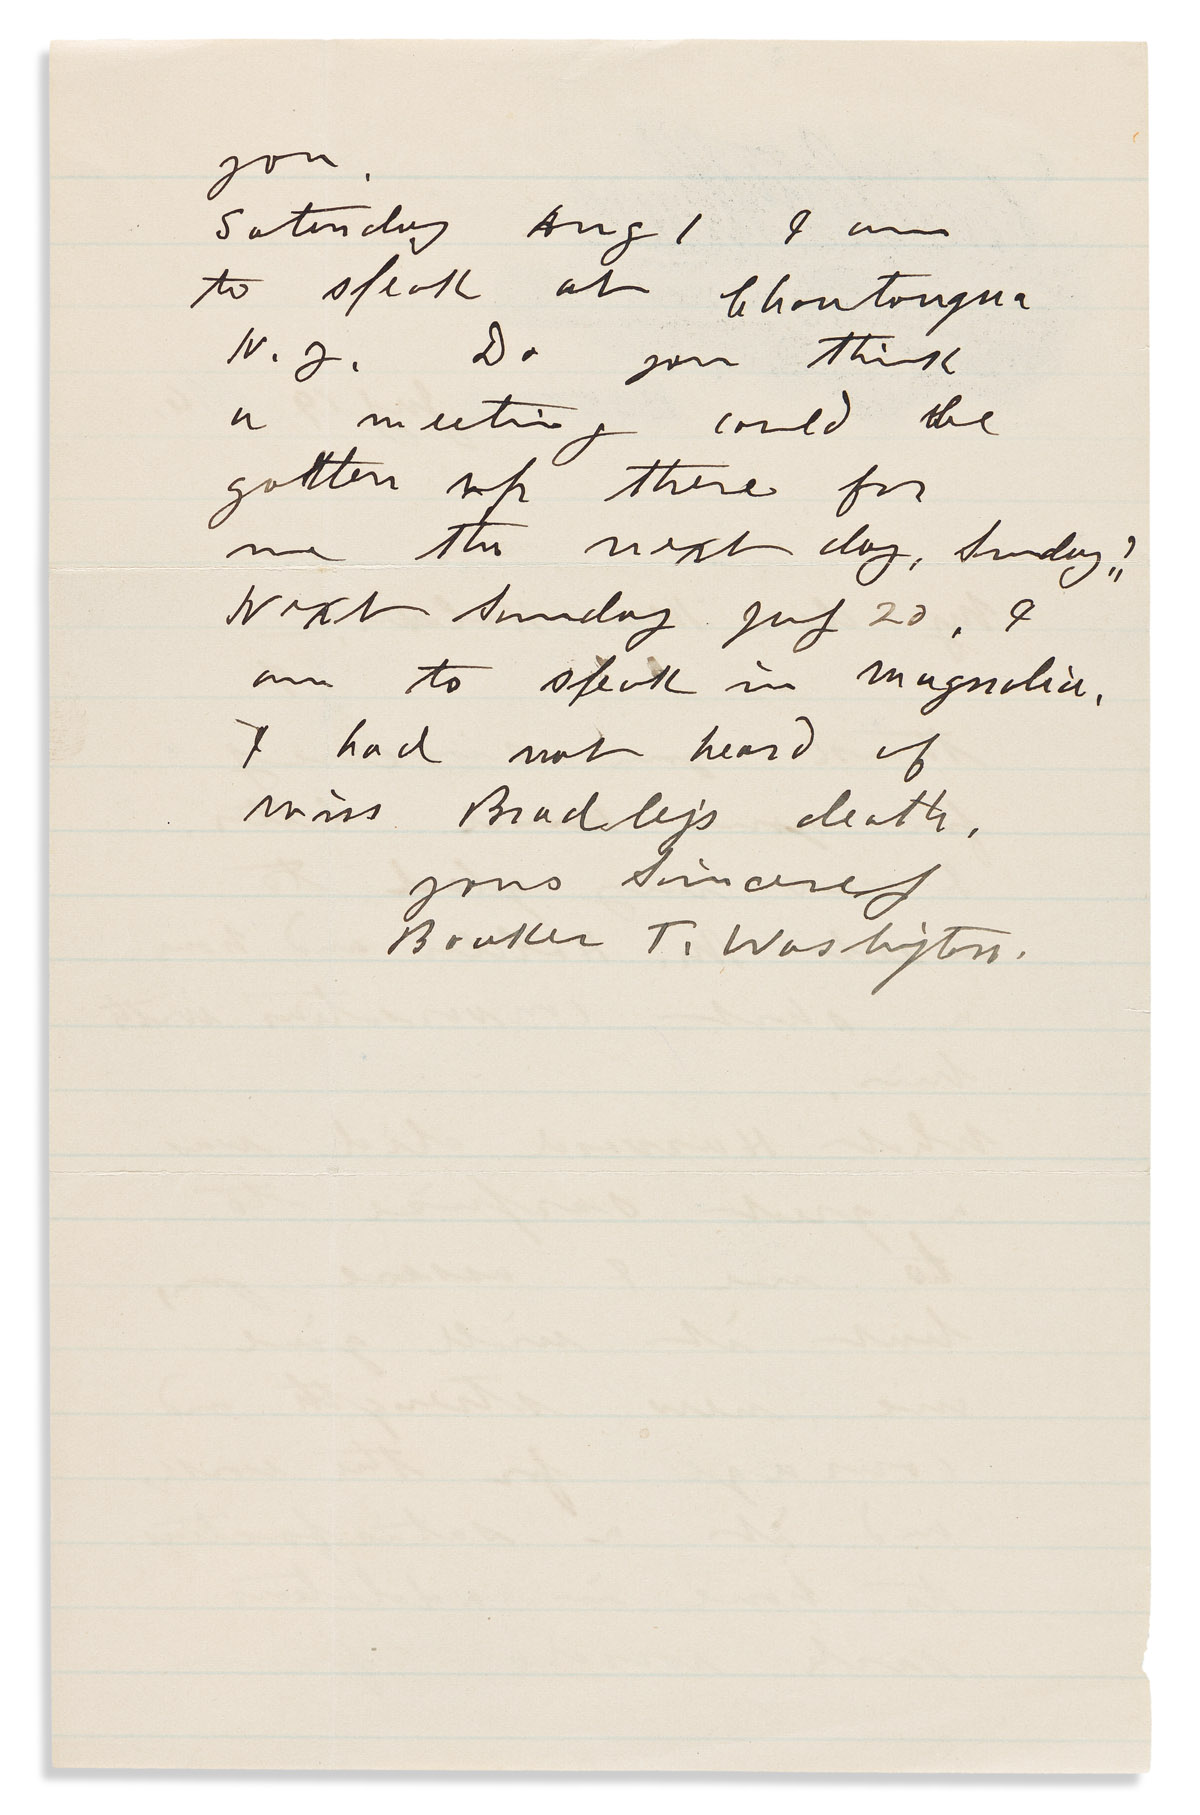 WASHINGTON, BOOKER T. Autograph Letter Signed, to My dear Mrs. Holder,